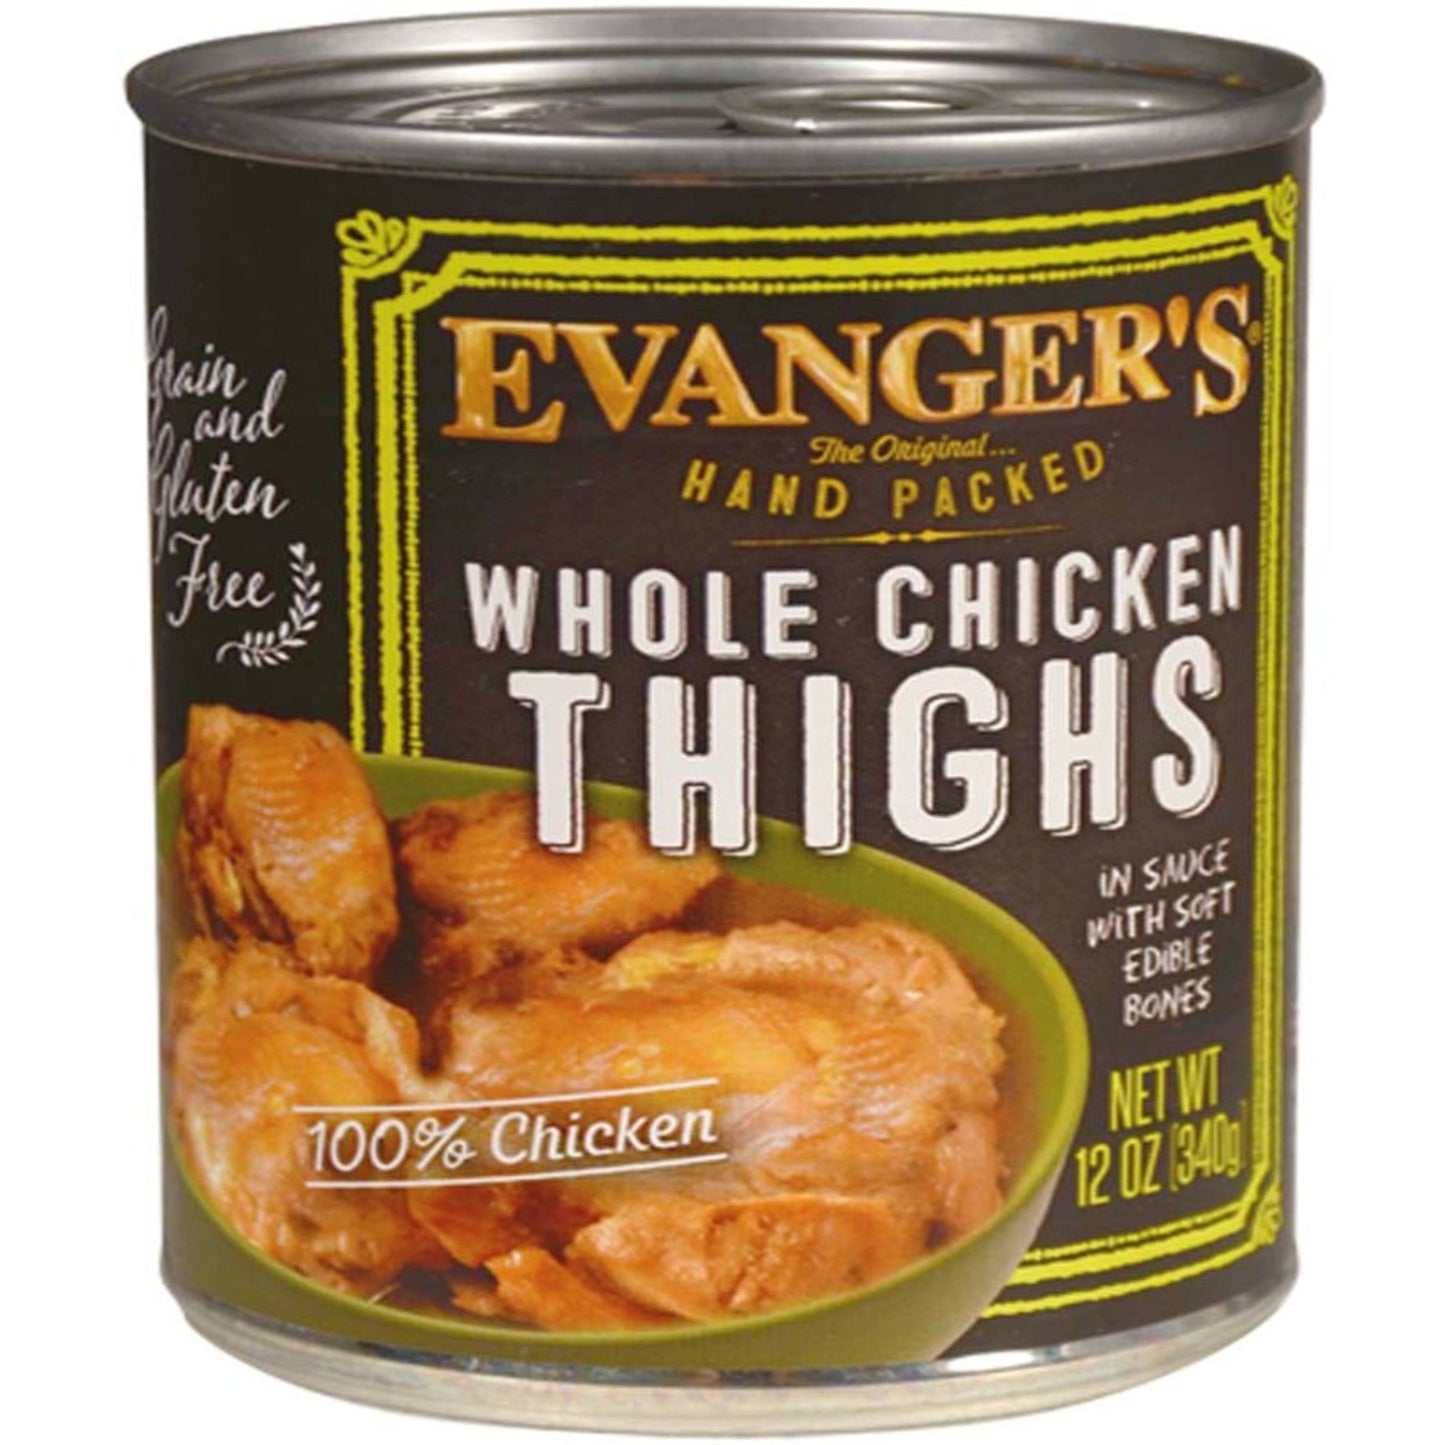 Evanger's Hand Packed Wet Dog Food Whole Chicken Thighs 12oz. (Case of 12)